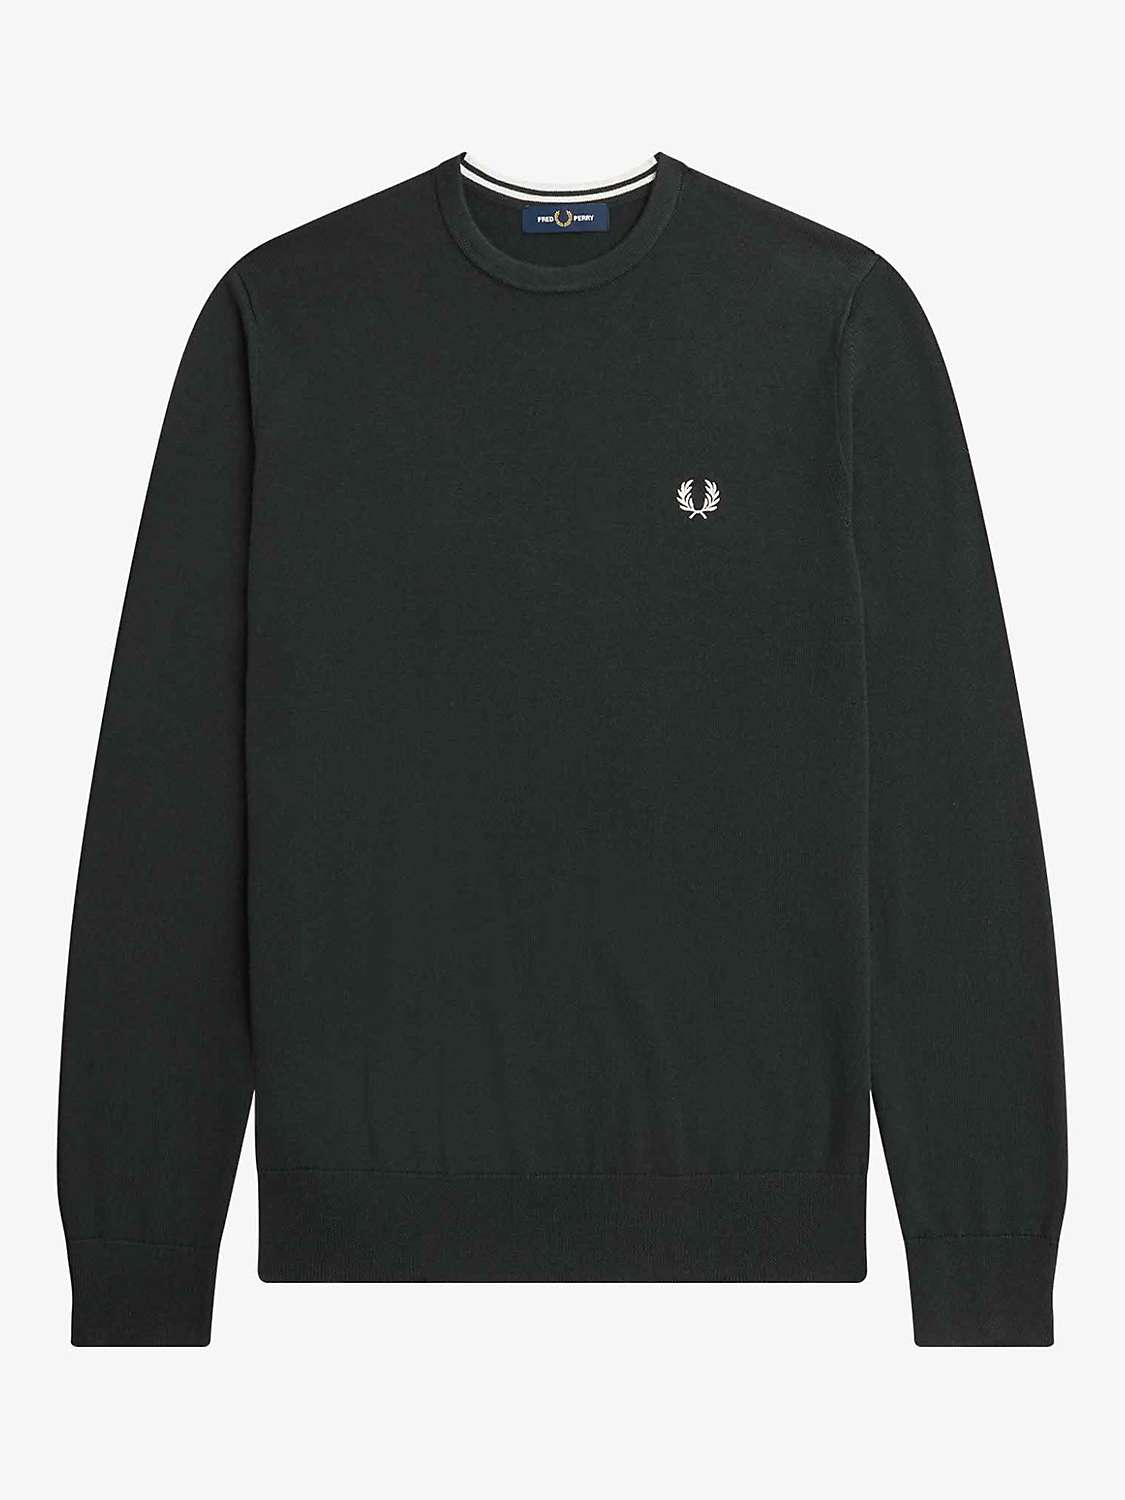 Buy Fred Perry Crew Neck Jumper, Green Online at johnlewis.com